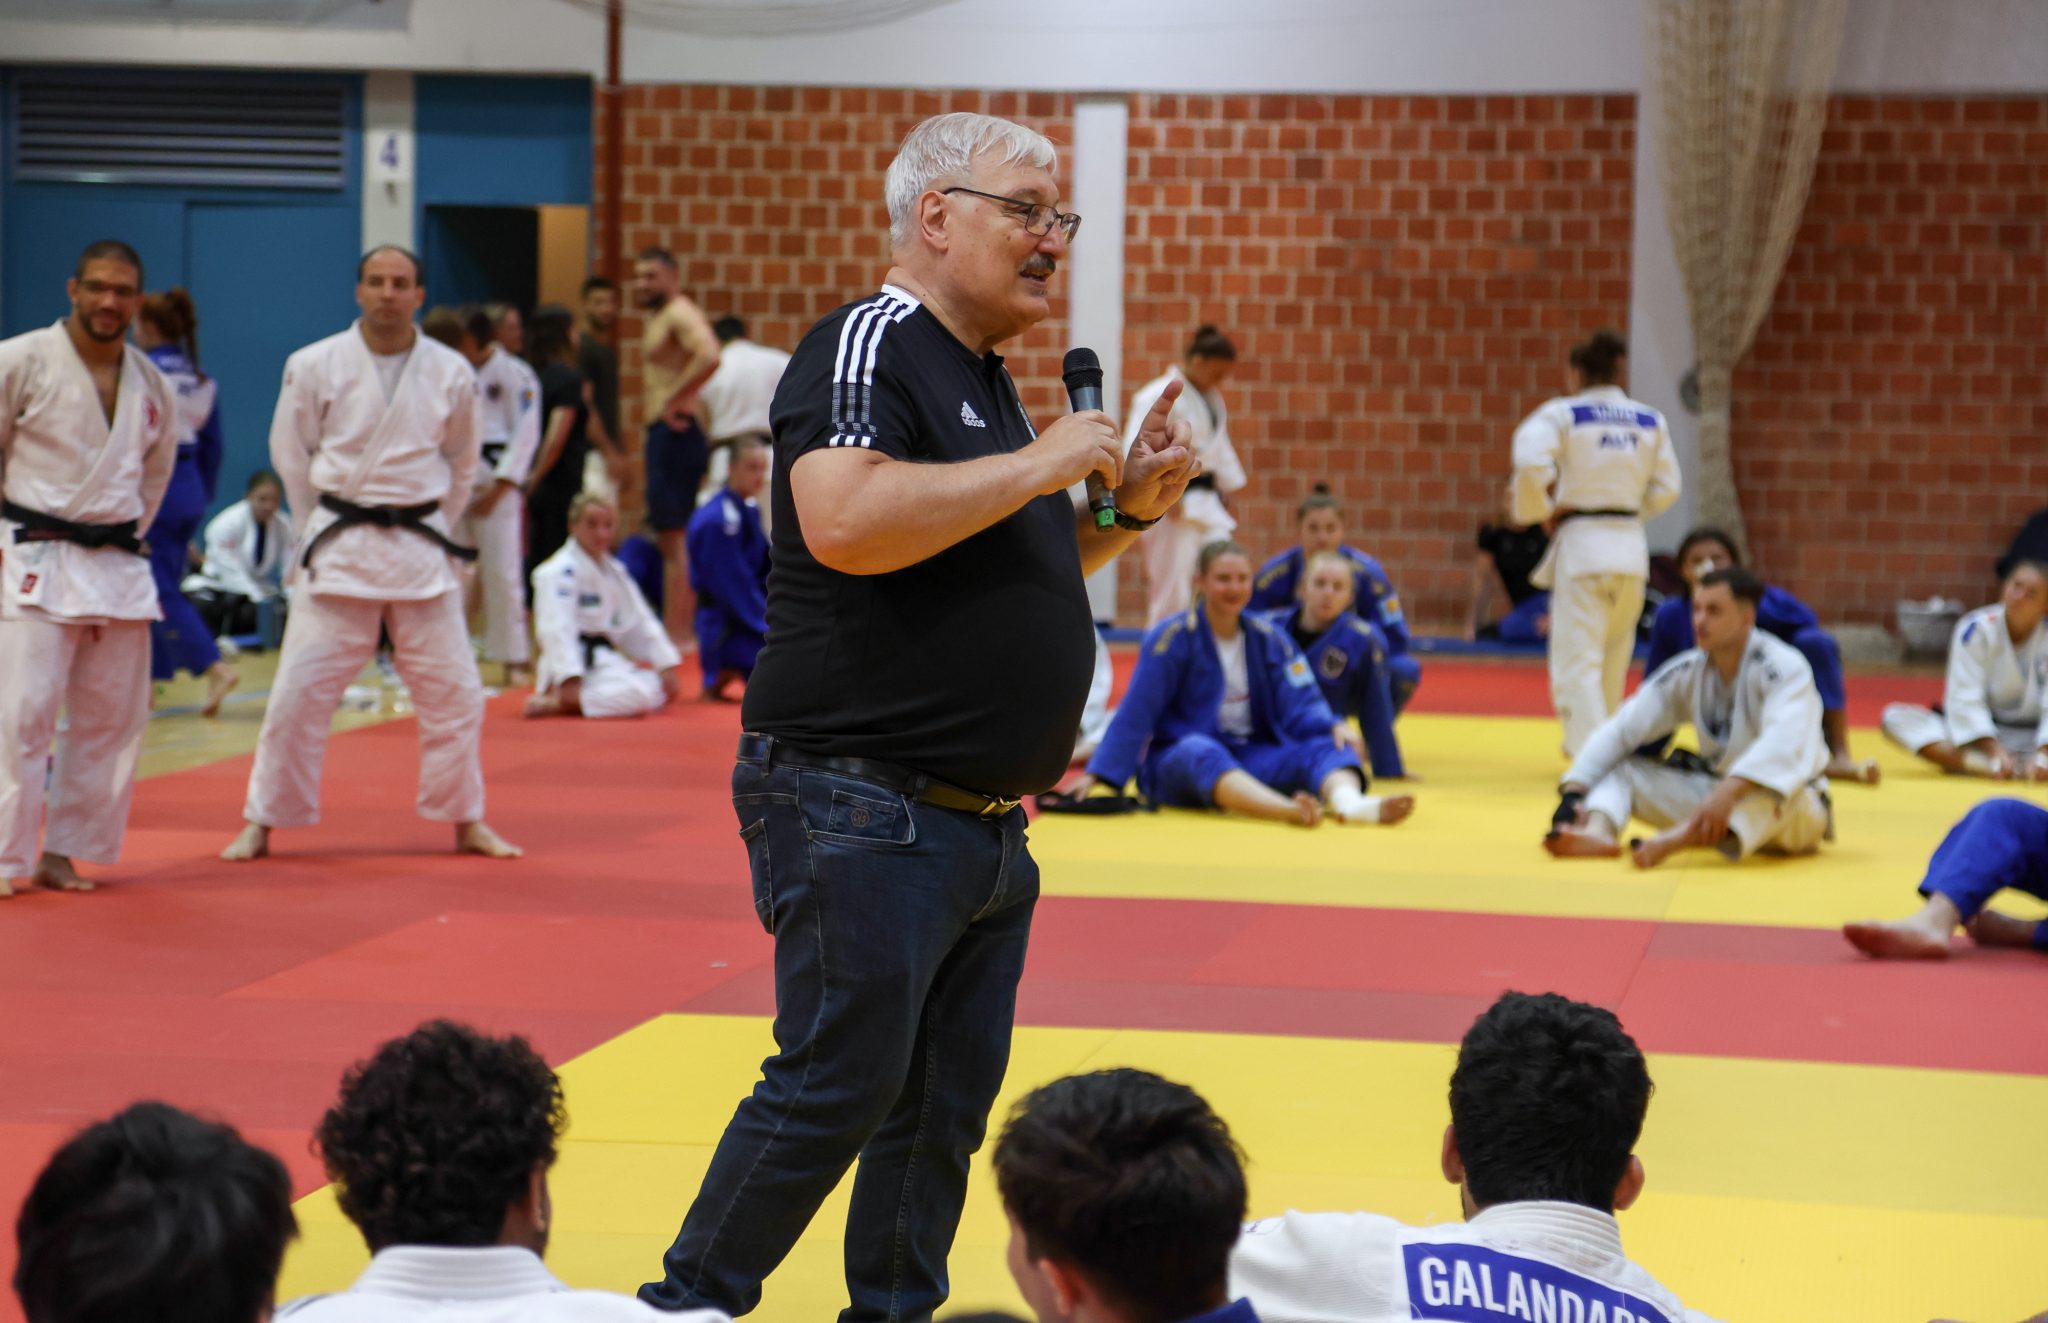 IJF ACADEMY REACH OUT TO ATHLETES